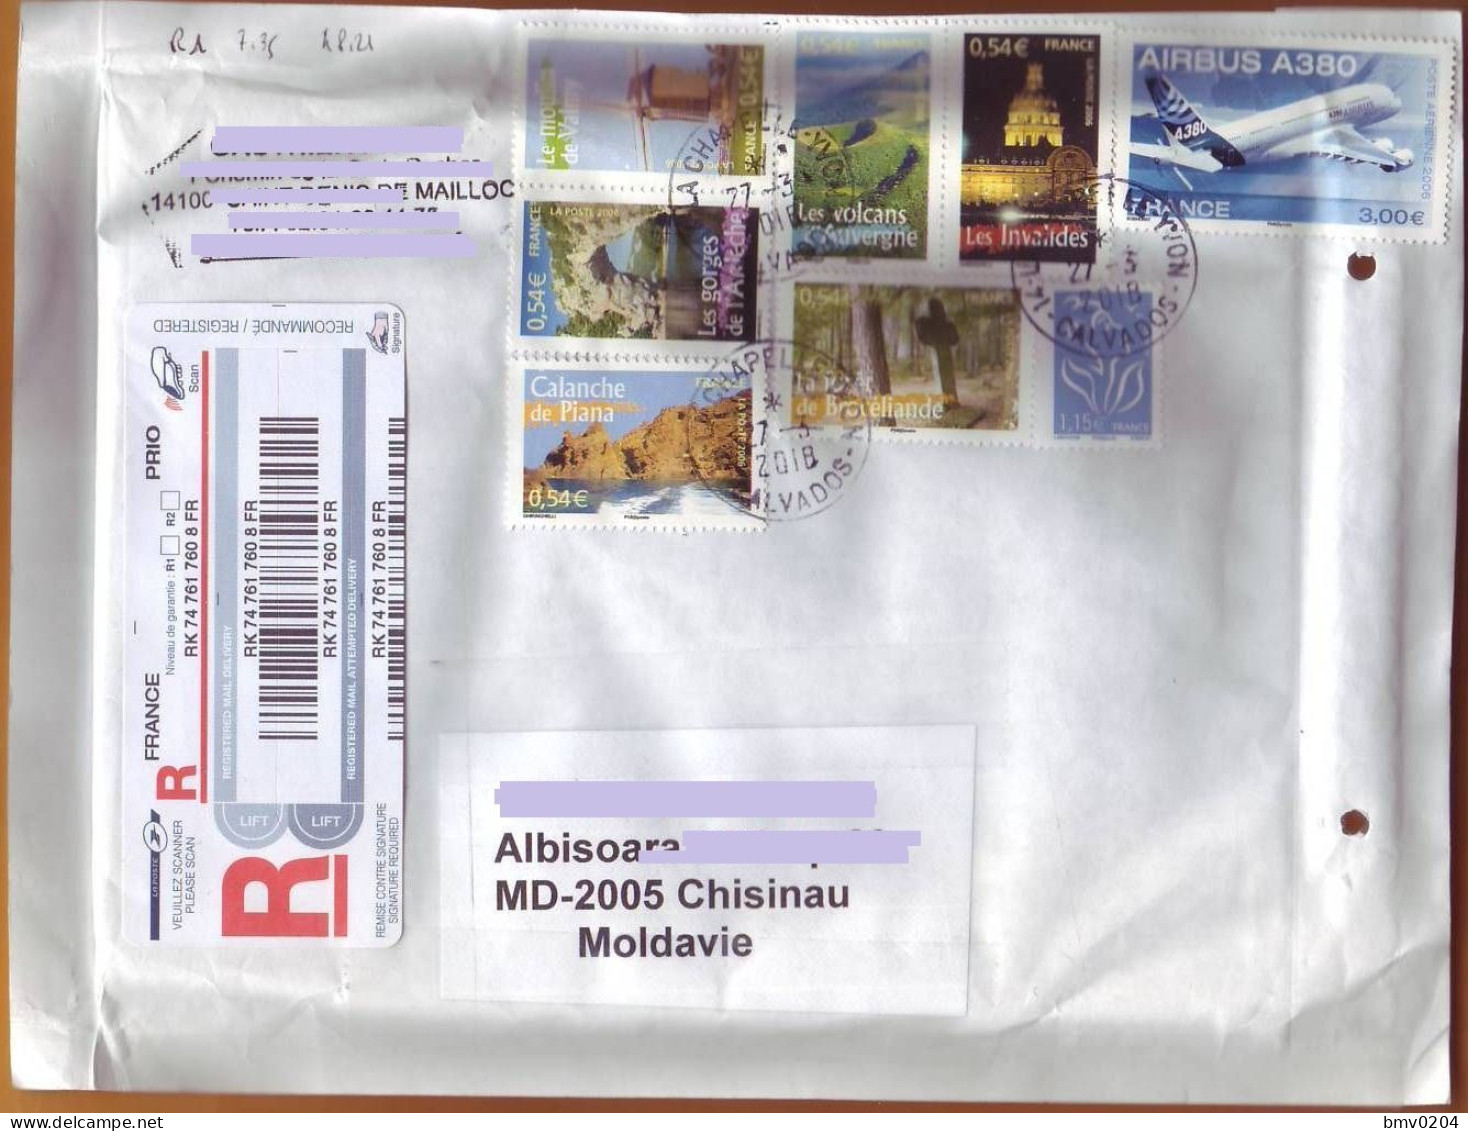 2006 France R-letter Moldova  Einschreiben Airbus Windmill, Rocks, Landscape Cover - Covers & Documents